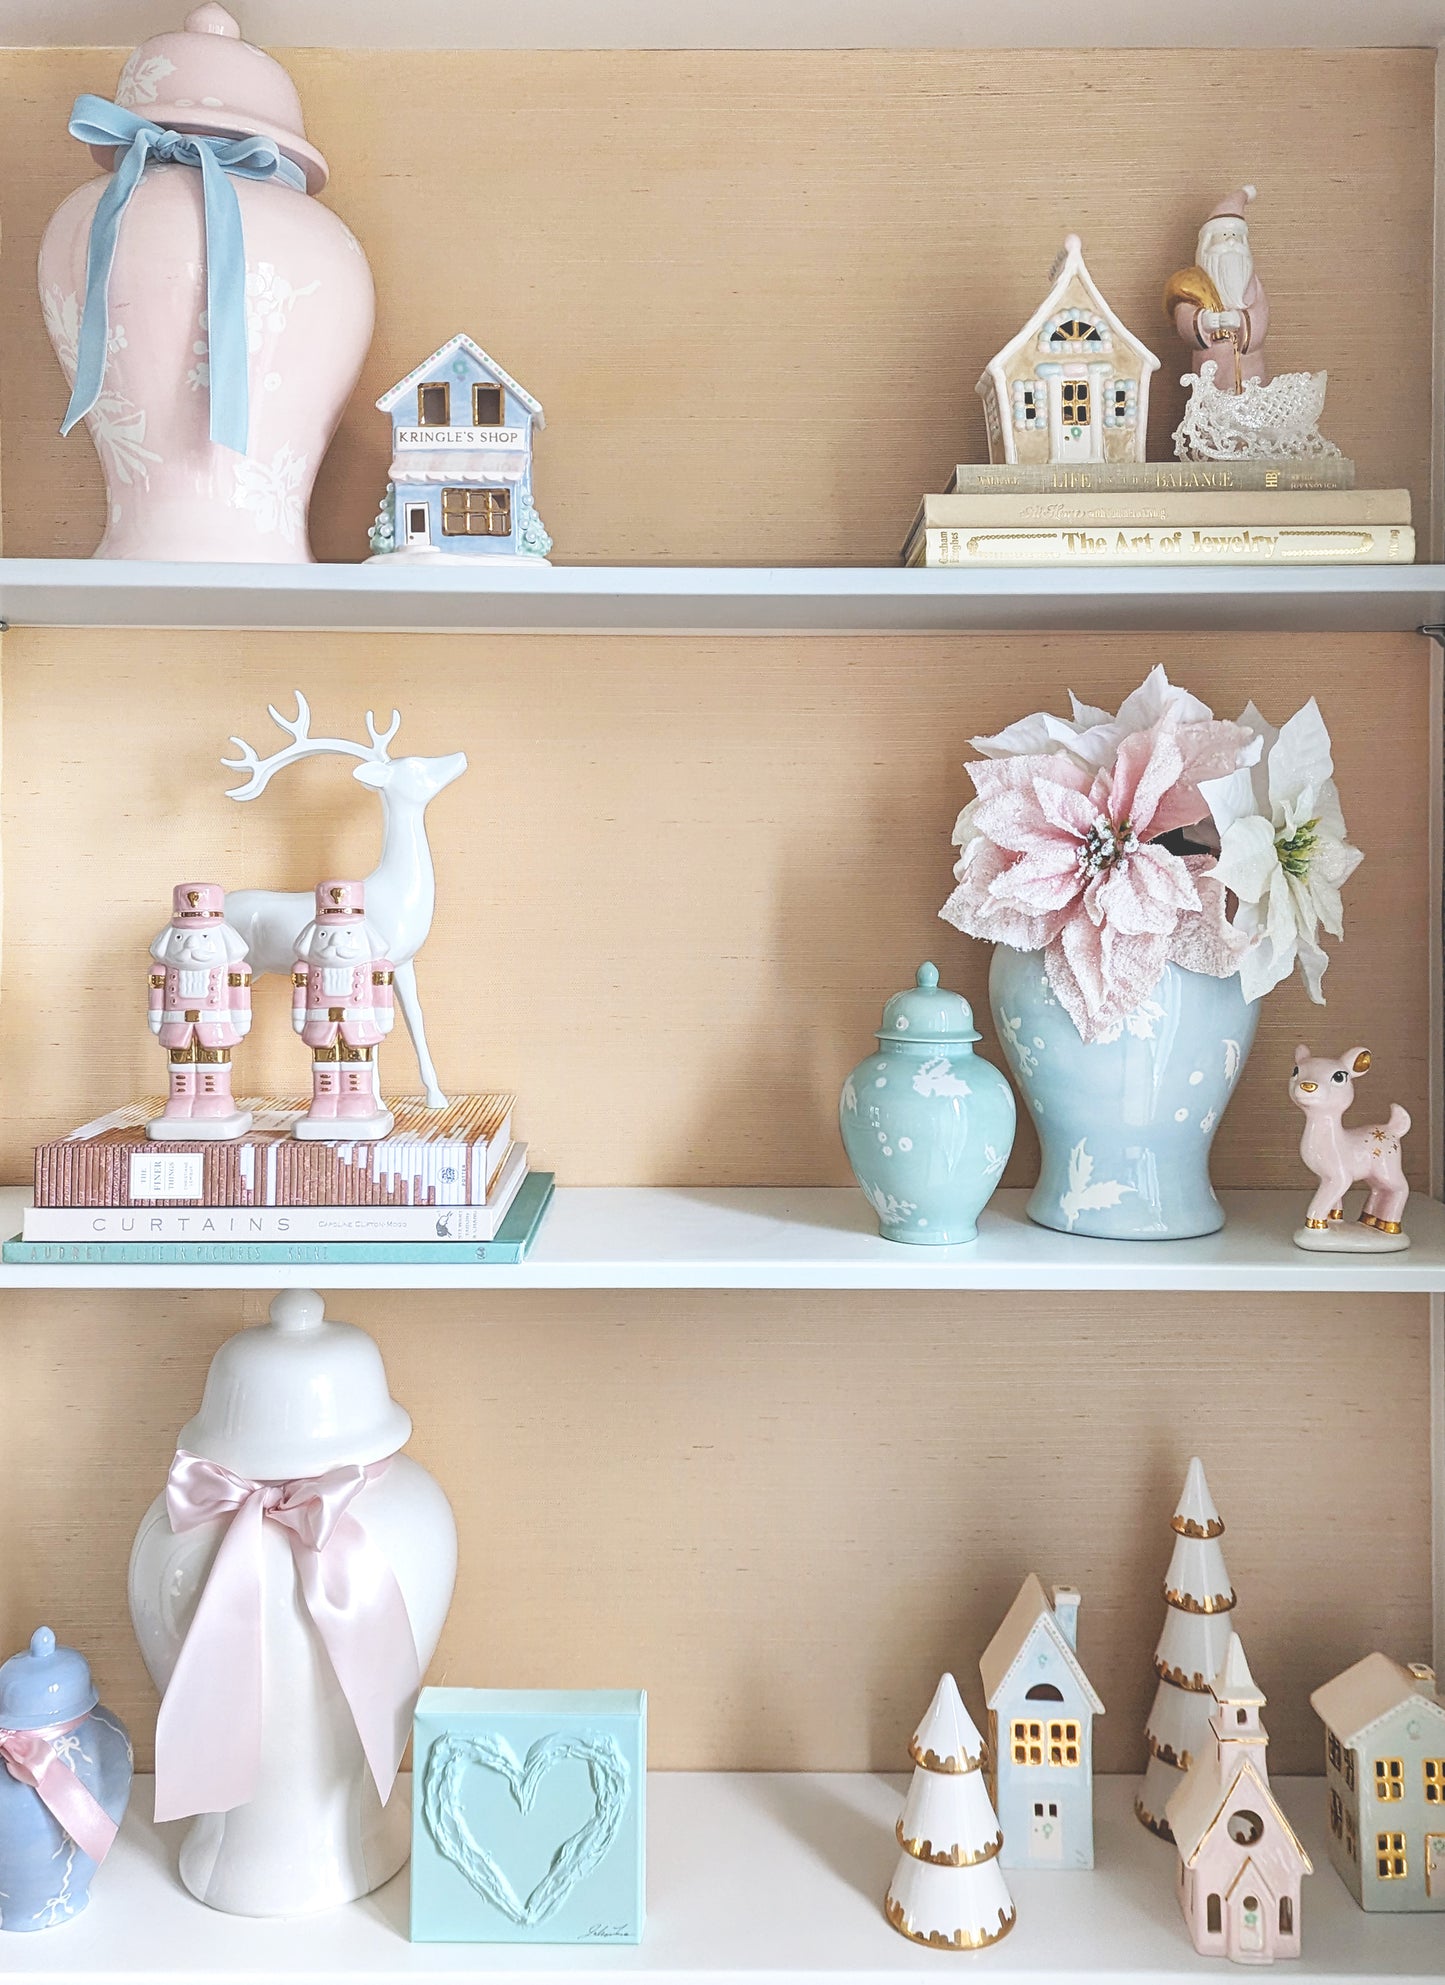 Deck the Halls Ginger Jars in Cherry Blossom Pink